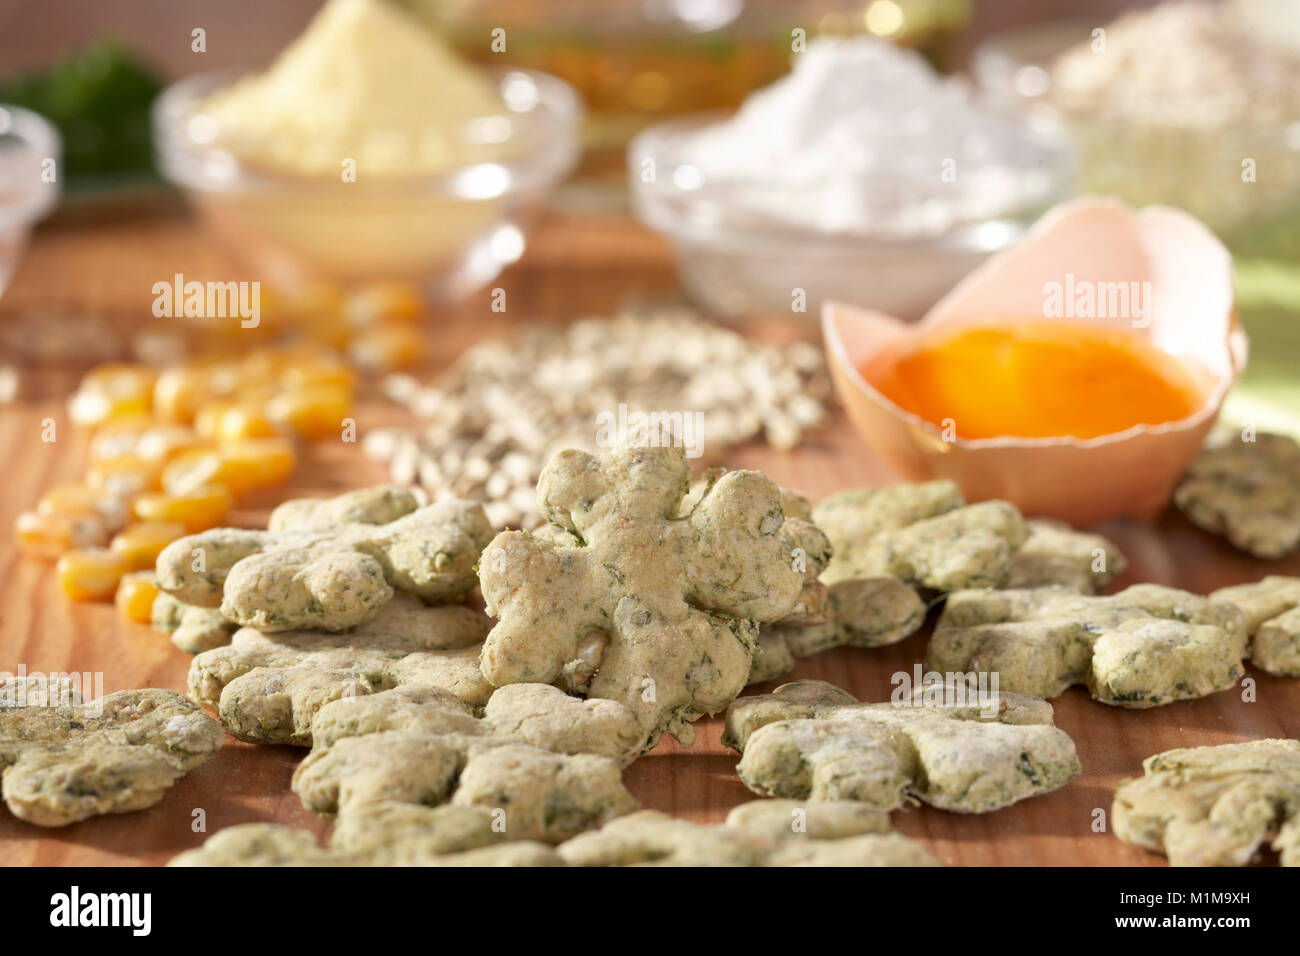 Domestic dog. Ingredients for biscuits as rewards for dogs and freshly baked biscuits. Germany Stock Photo